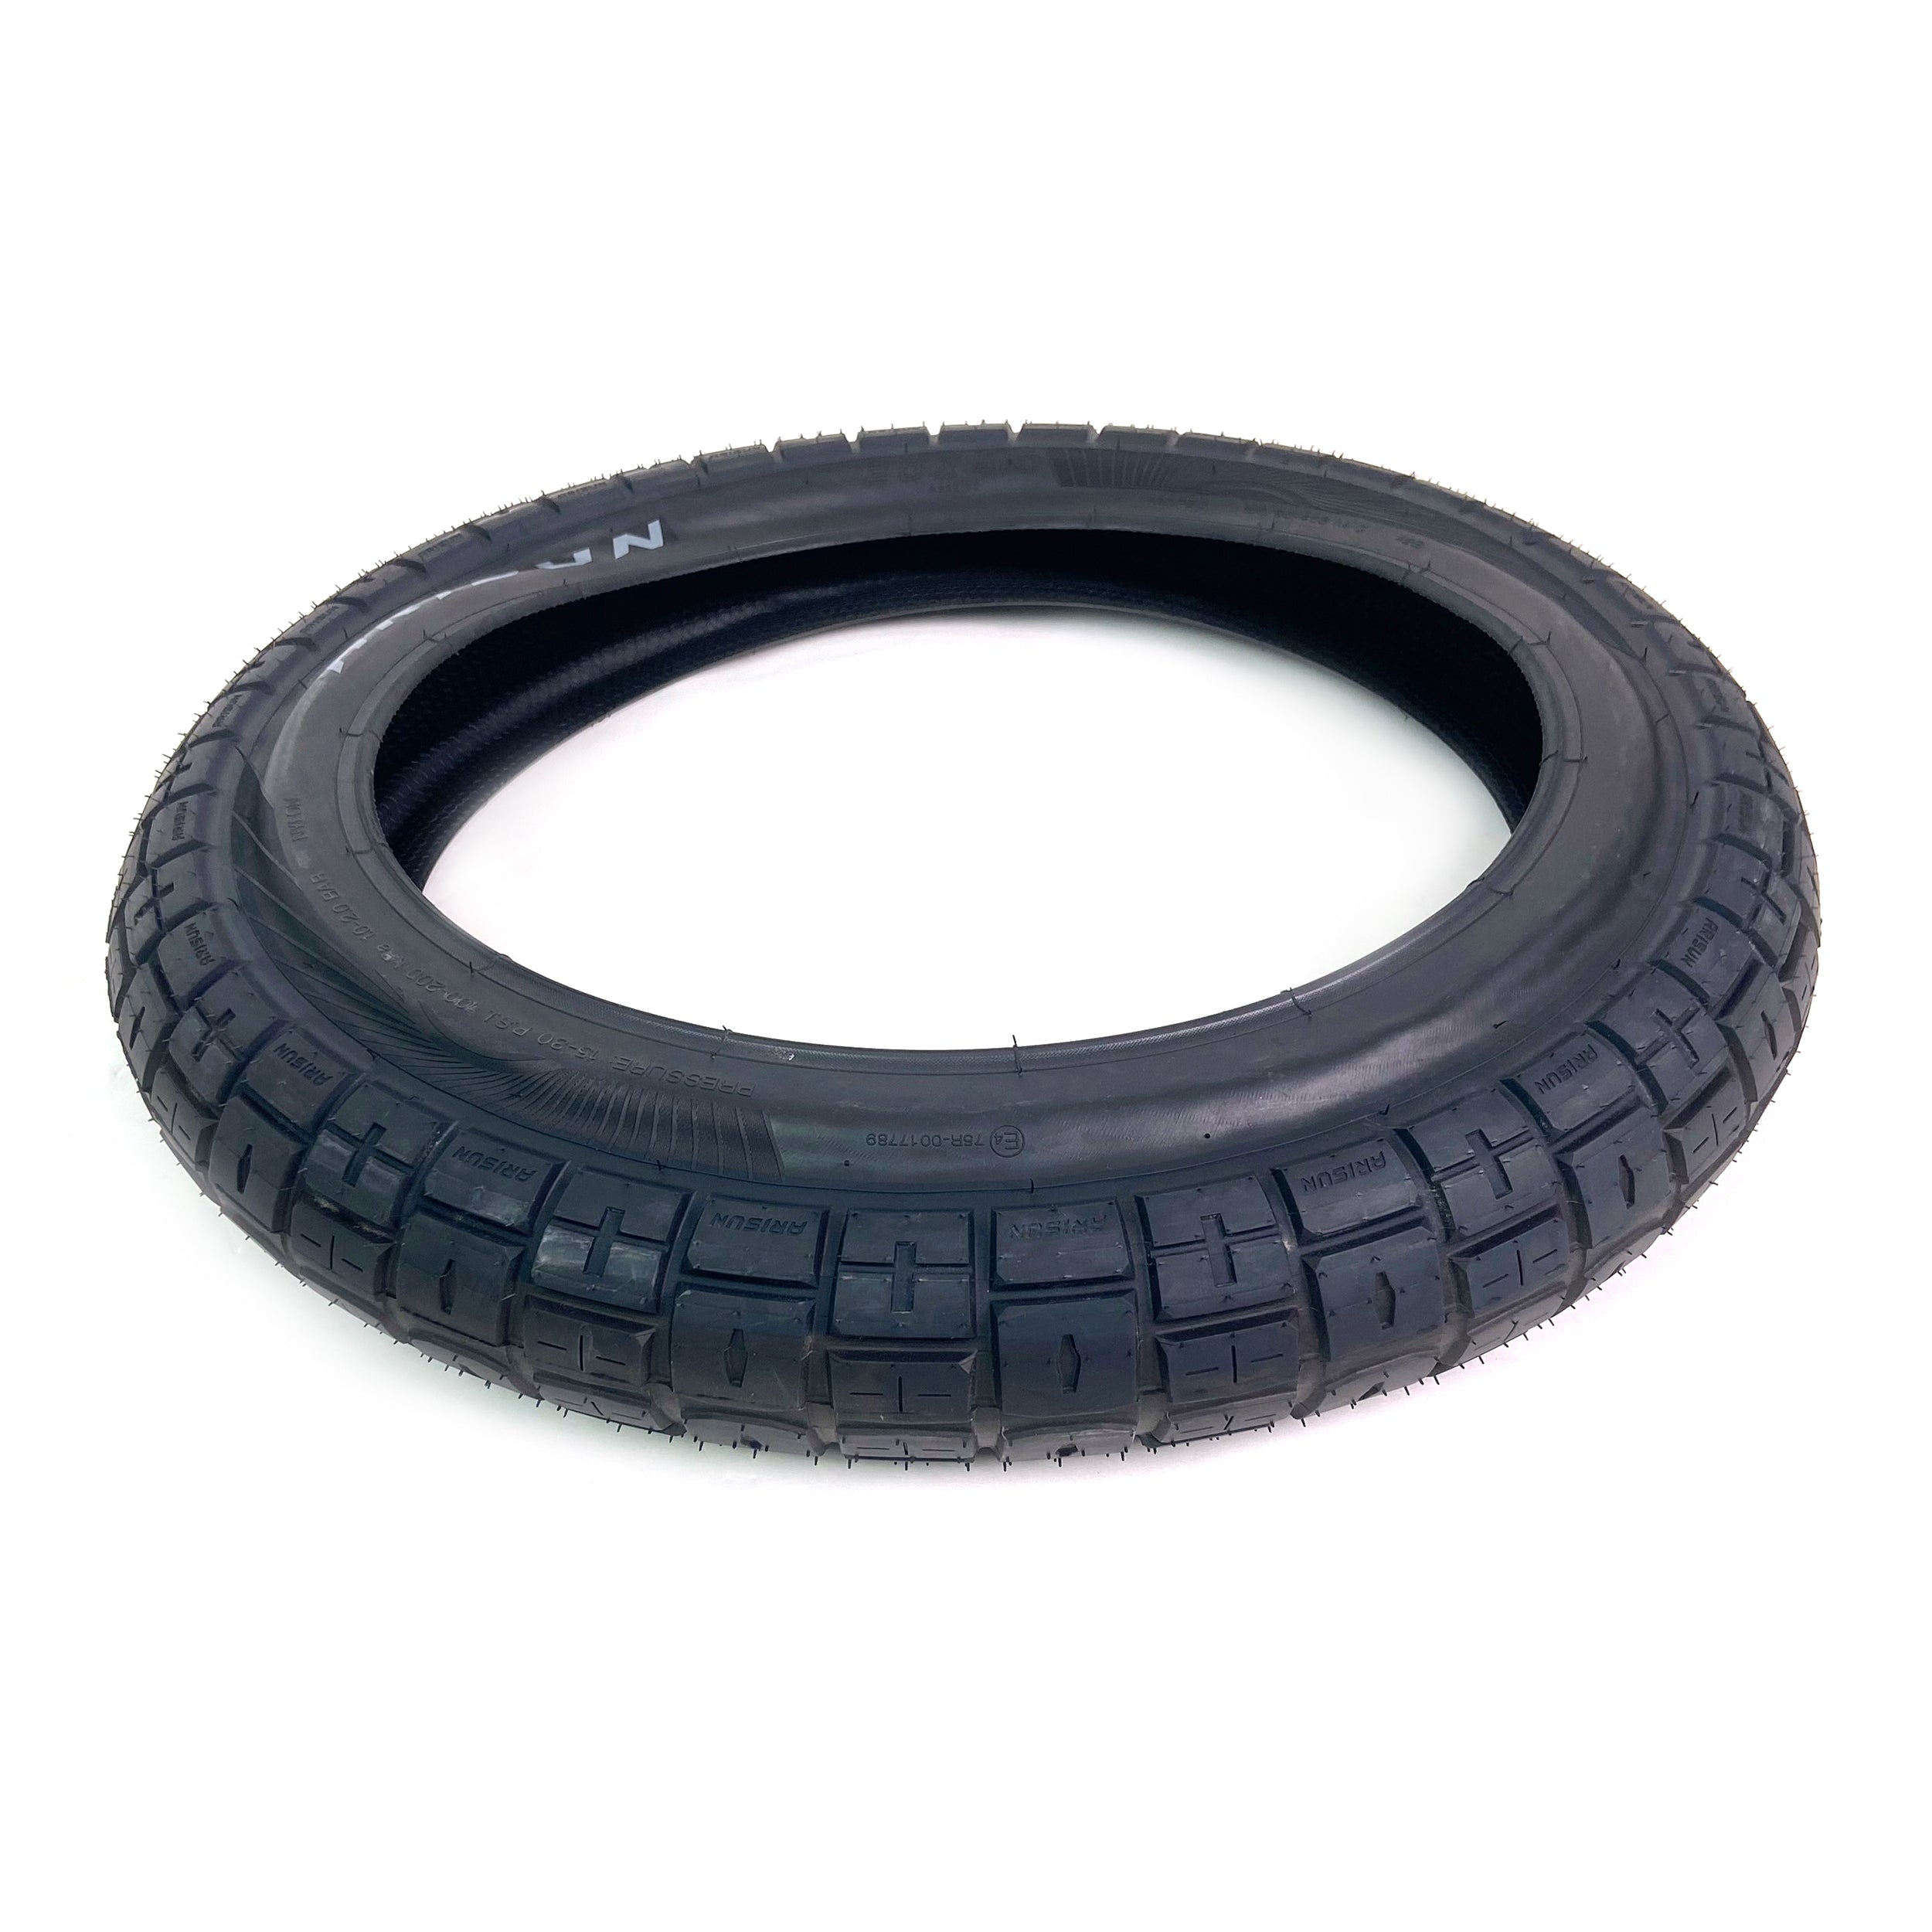 OUTER TIRE FOR COSWHEEL EBIKE